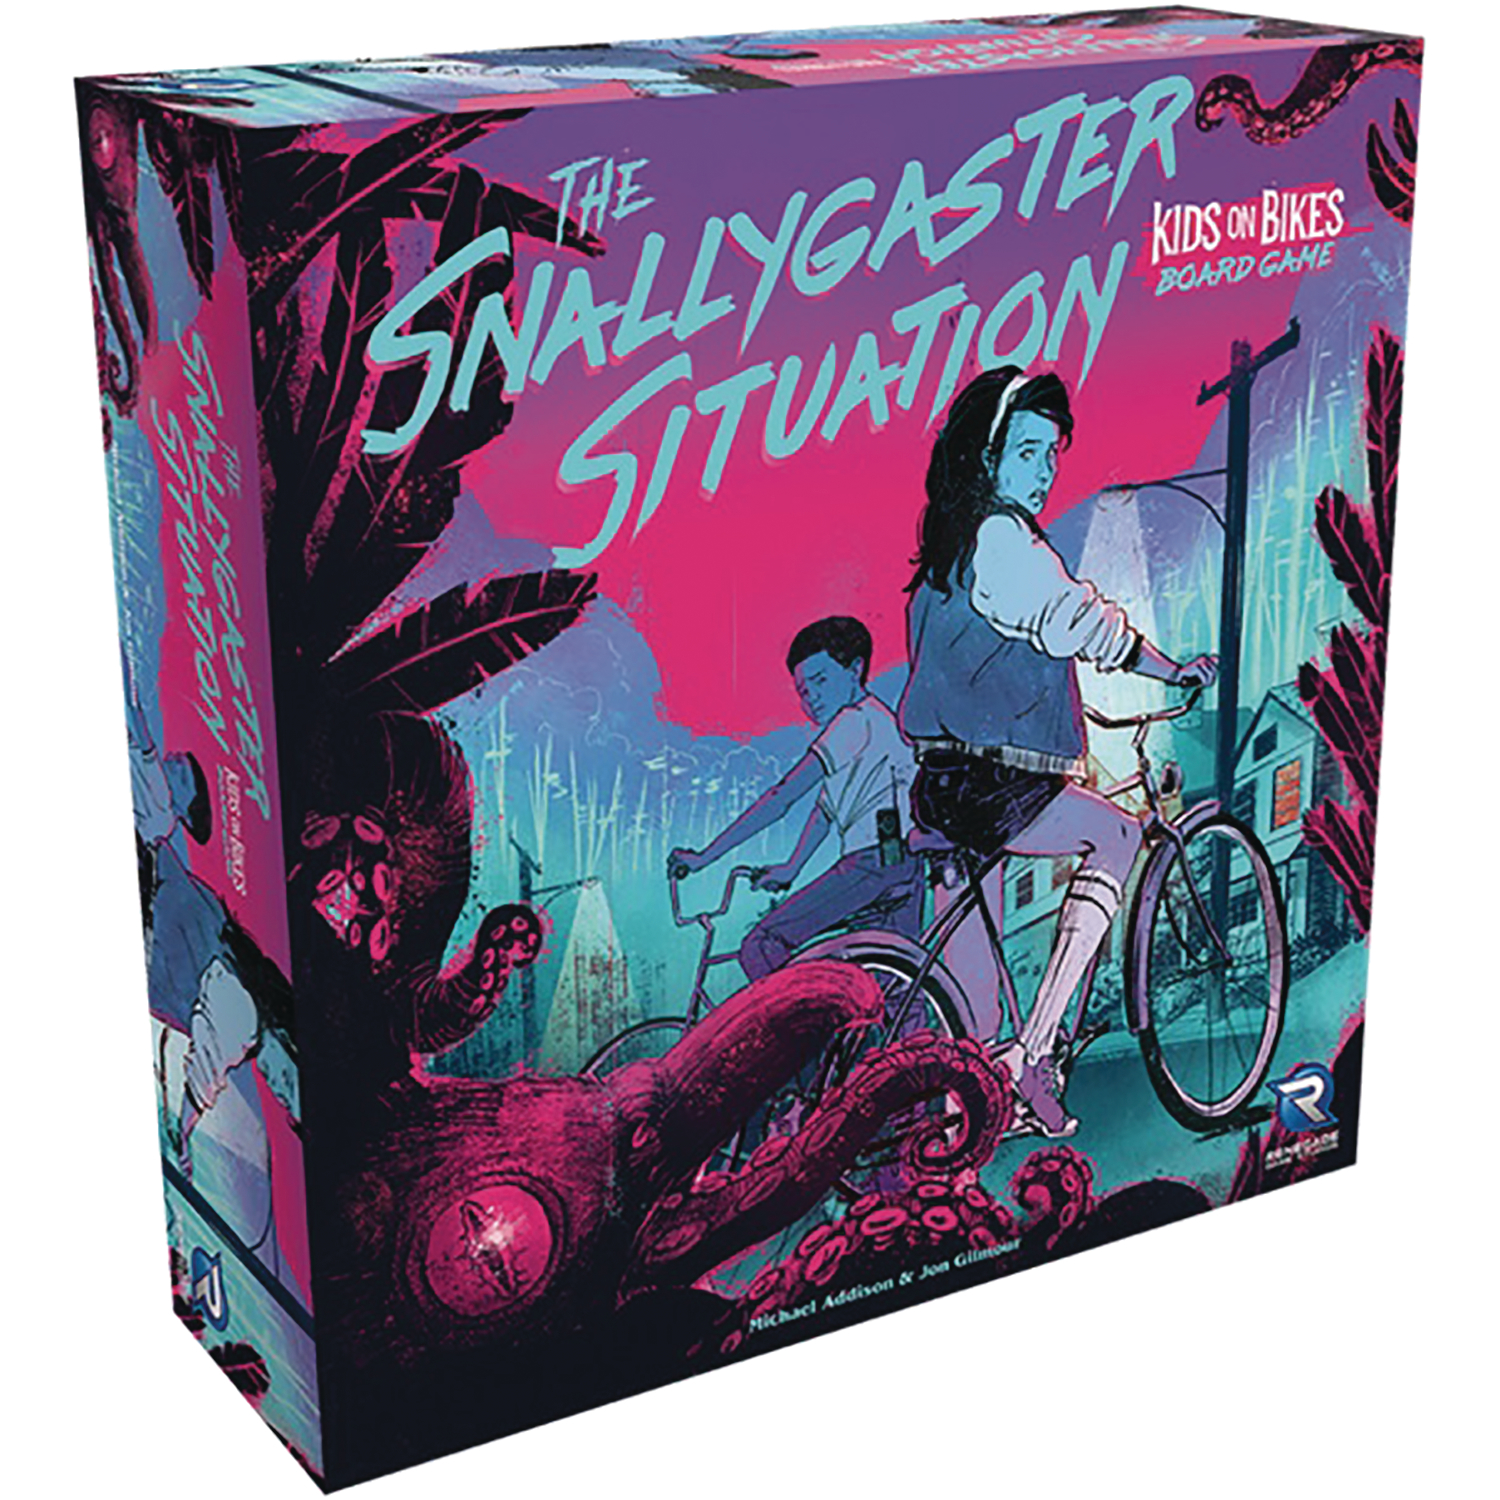 Snallygaster Situation A Kids On Bikes Board Game